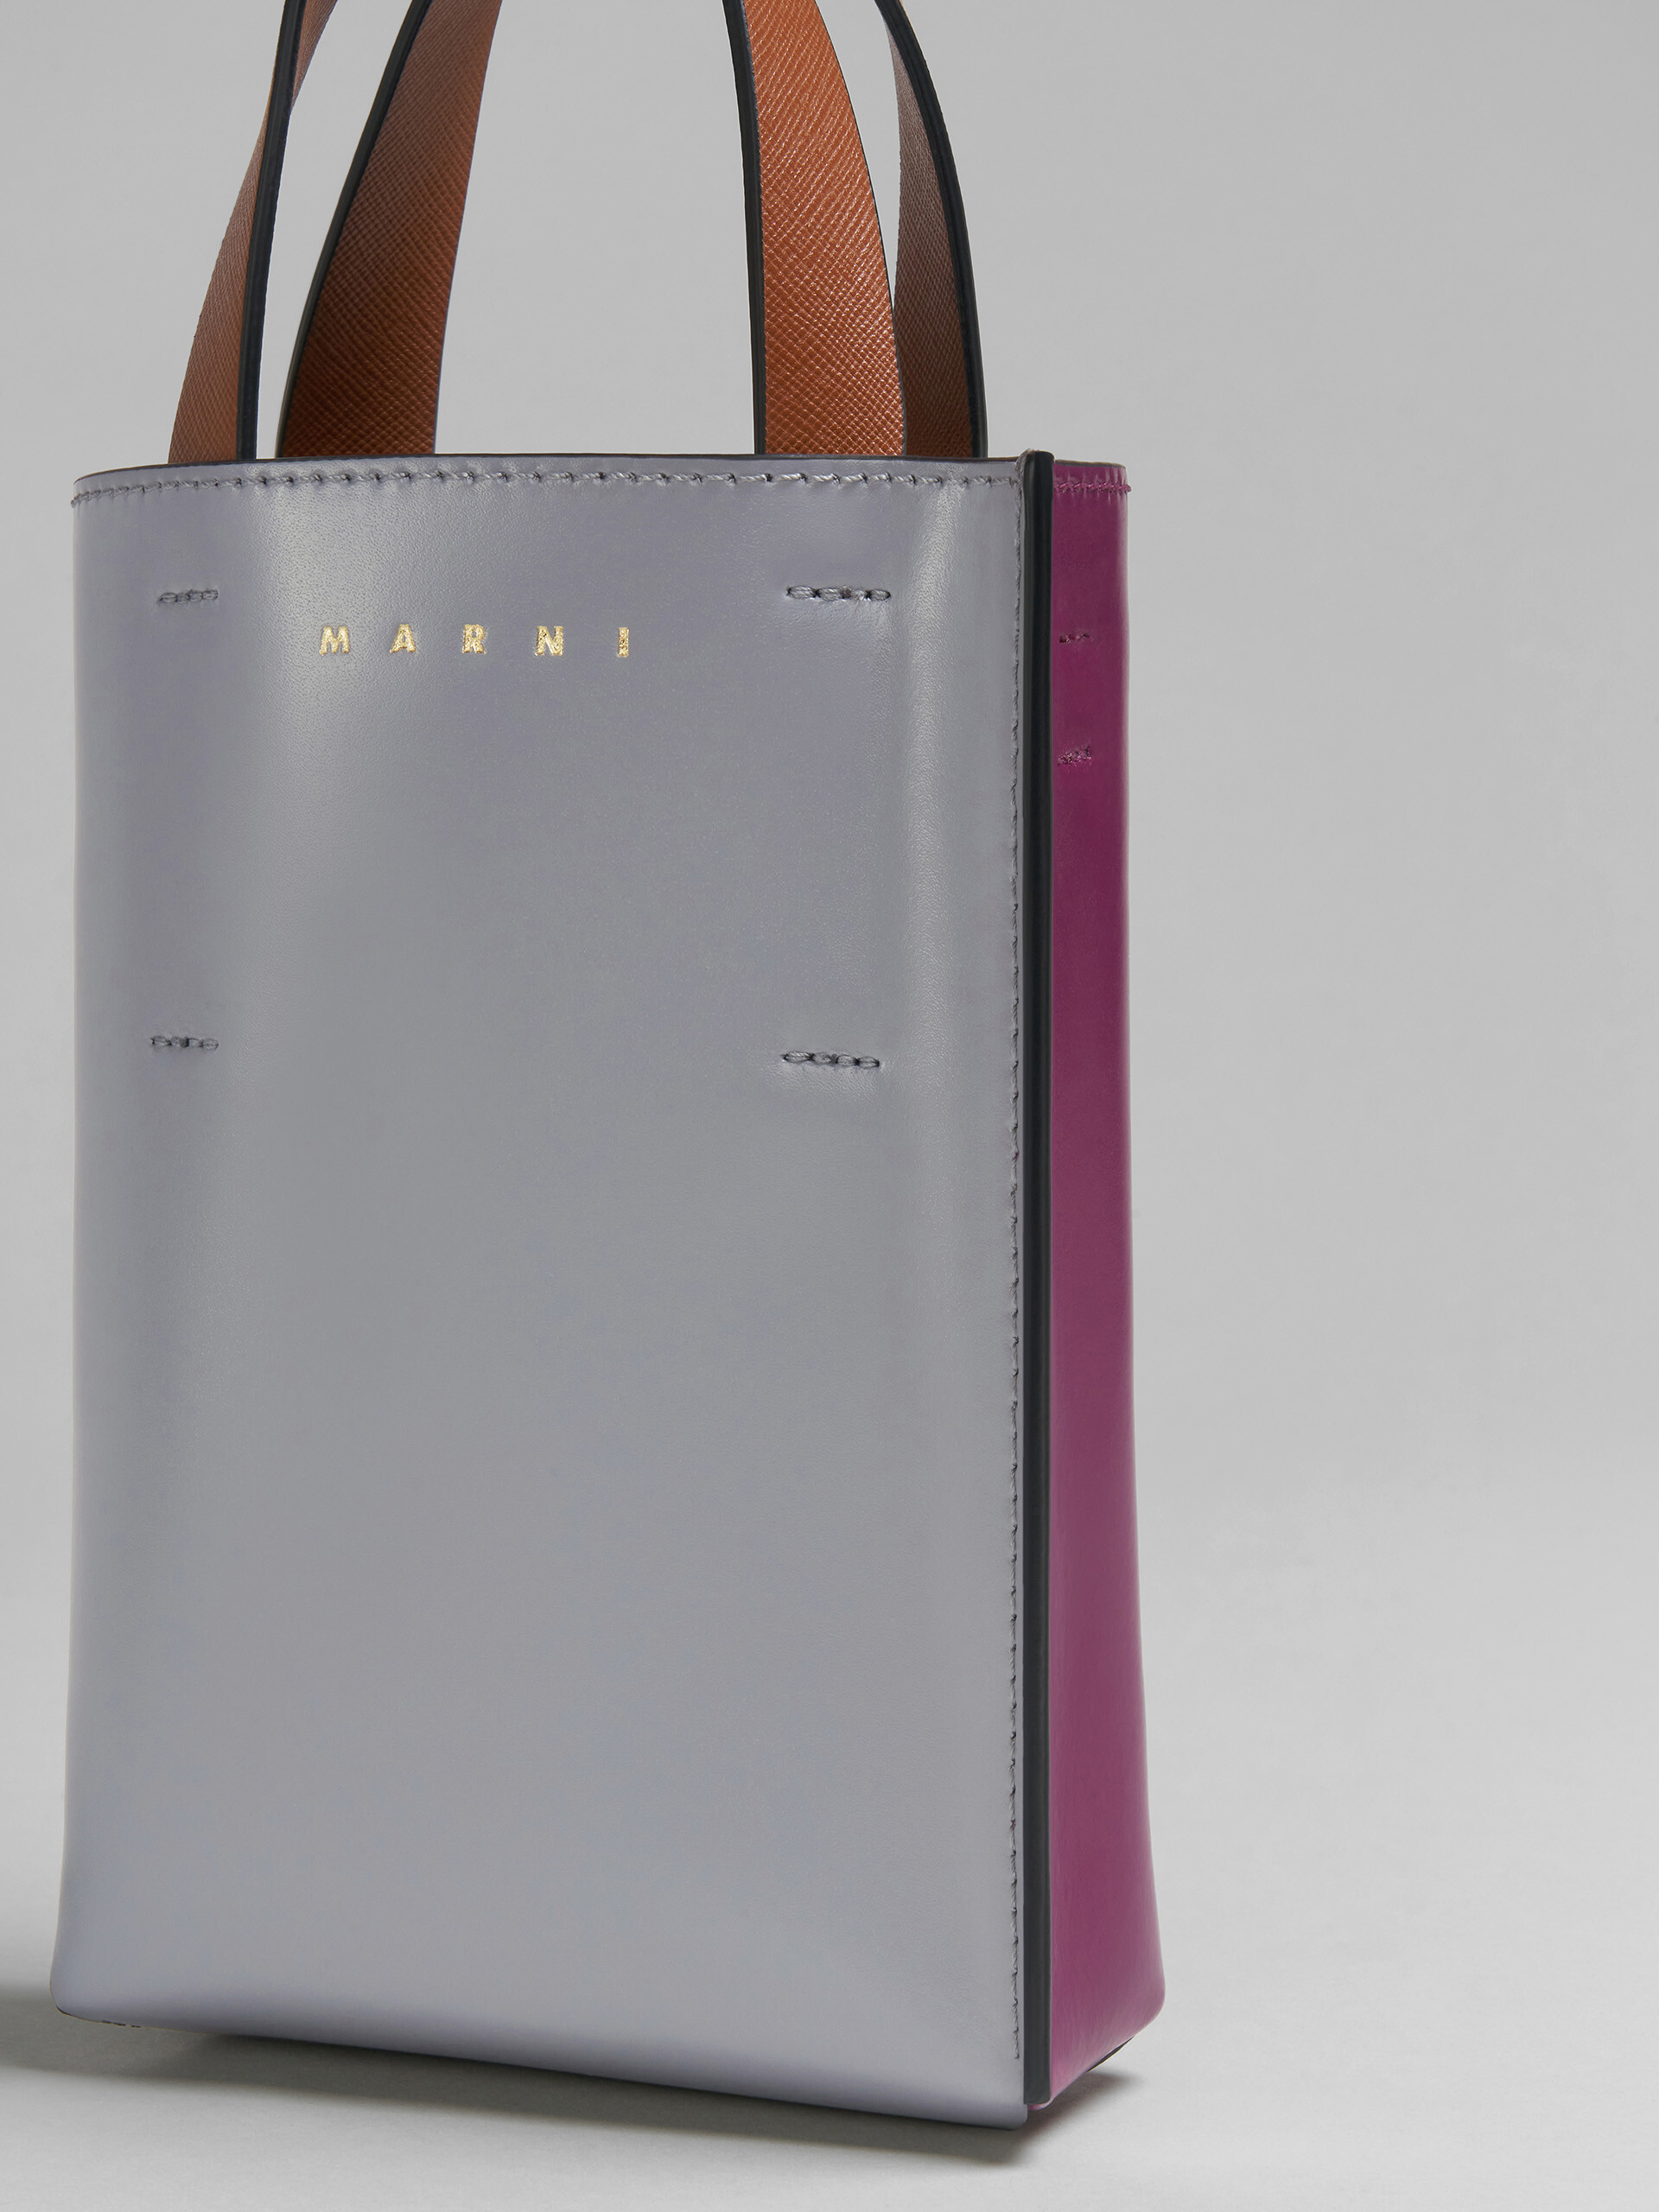 MUSEO nano bag in grey and purple leather - Shopping Bags - Image 5